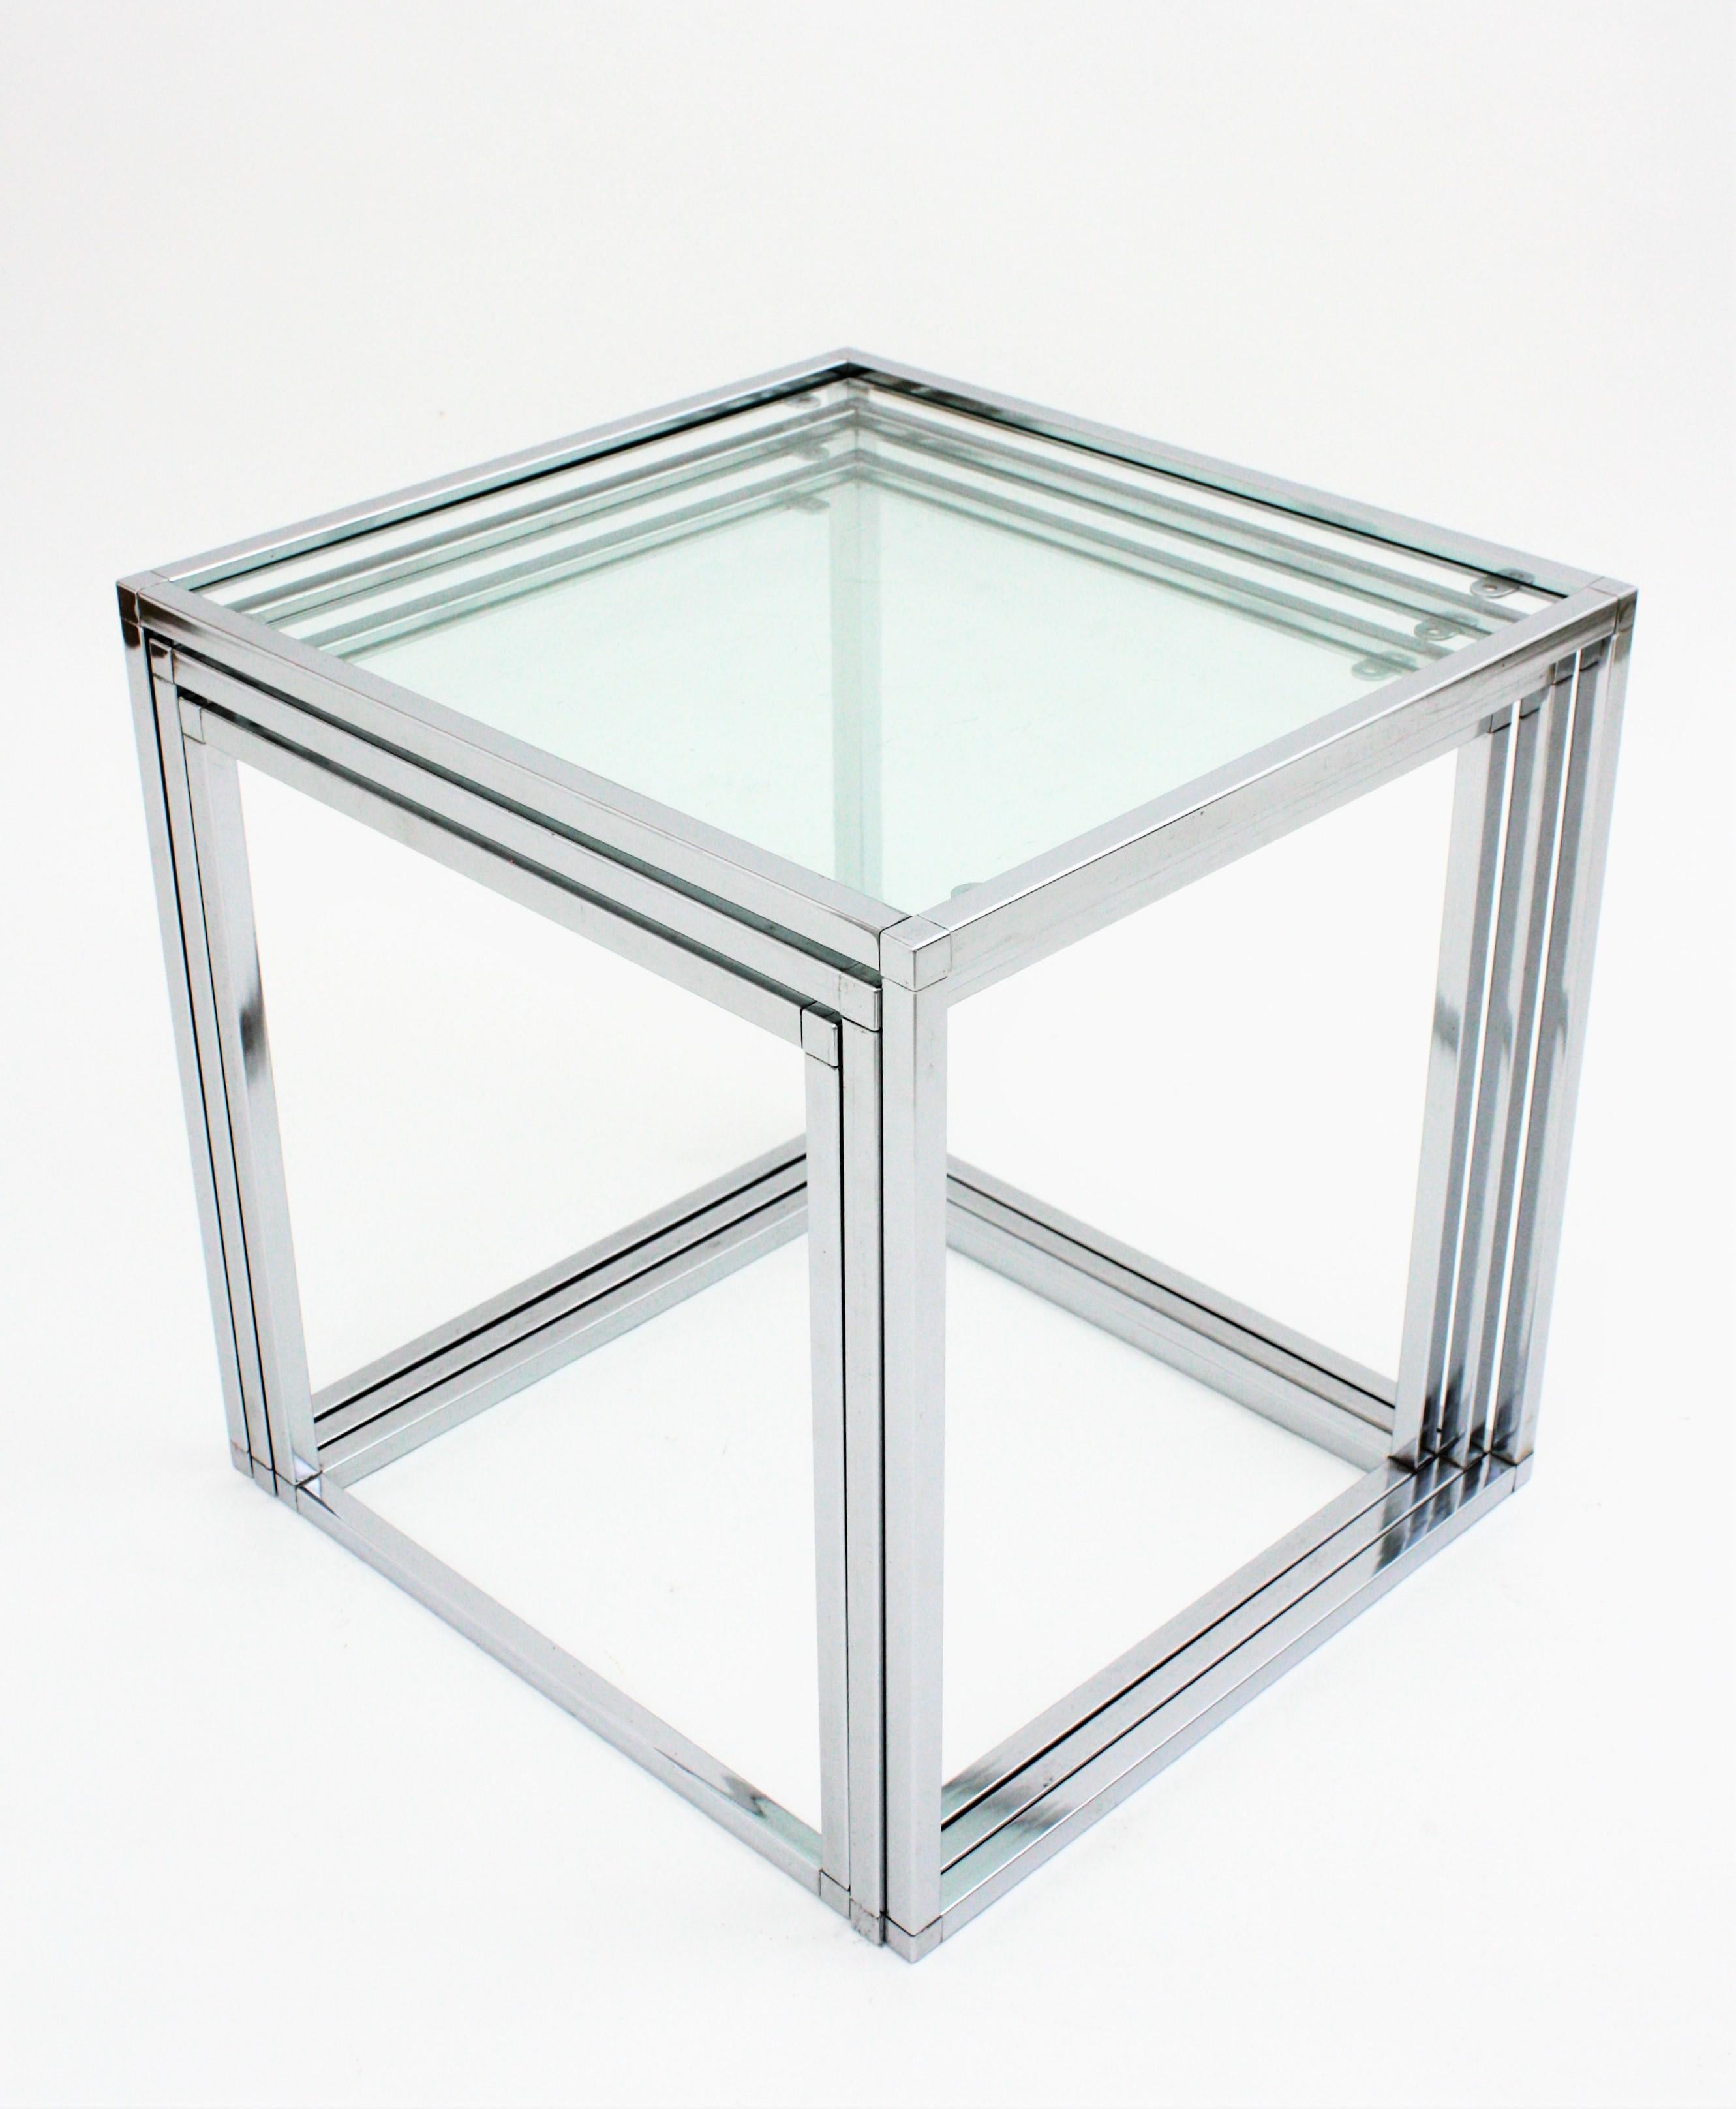 20th Century Italian Nesting Tables in Chromed Steel and Glass